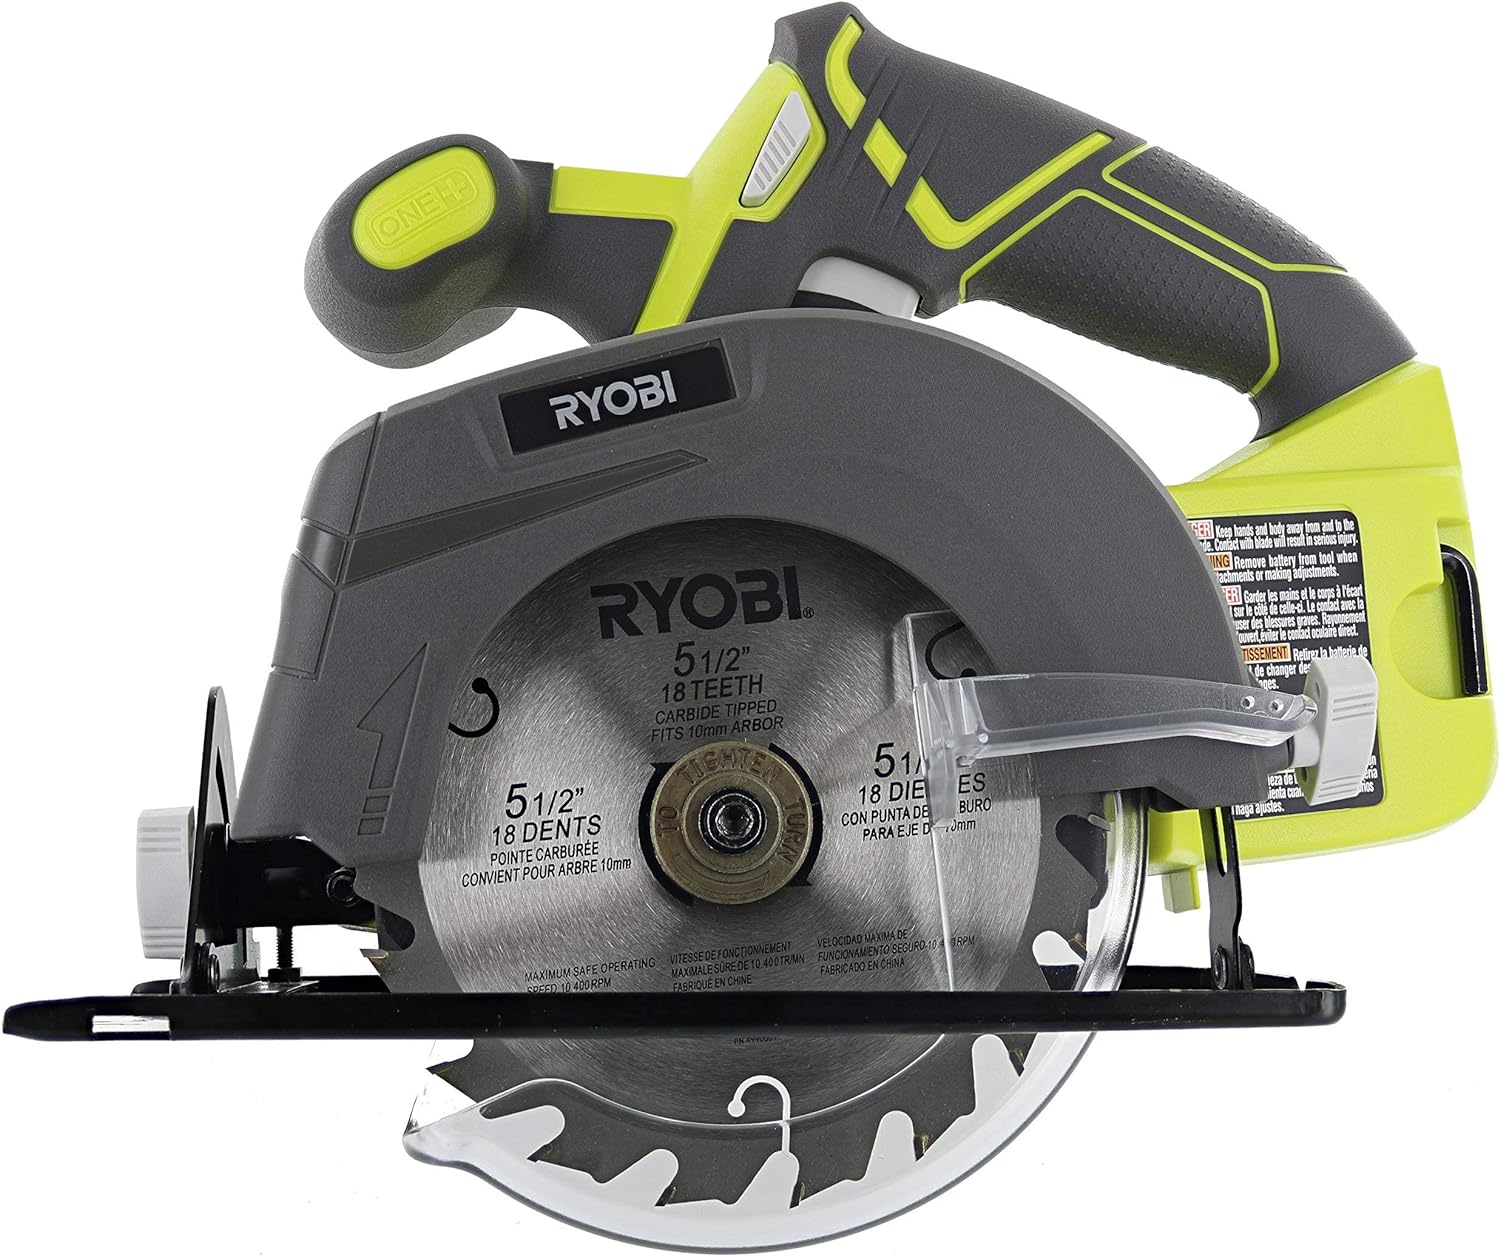 Ryobi One P505 18V Lithium Ion Cordless 5 1/2 4,700 RPM Circular Saw (Battery Not Included, Power Tool Only), Green